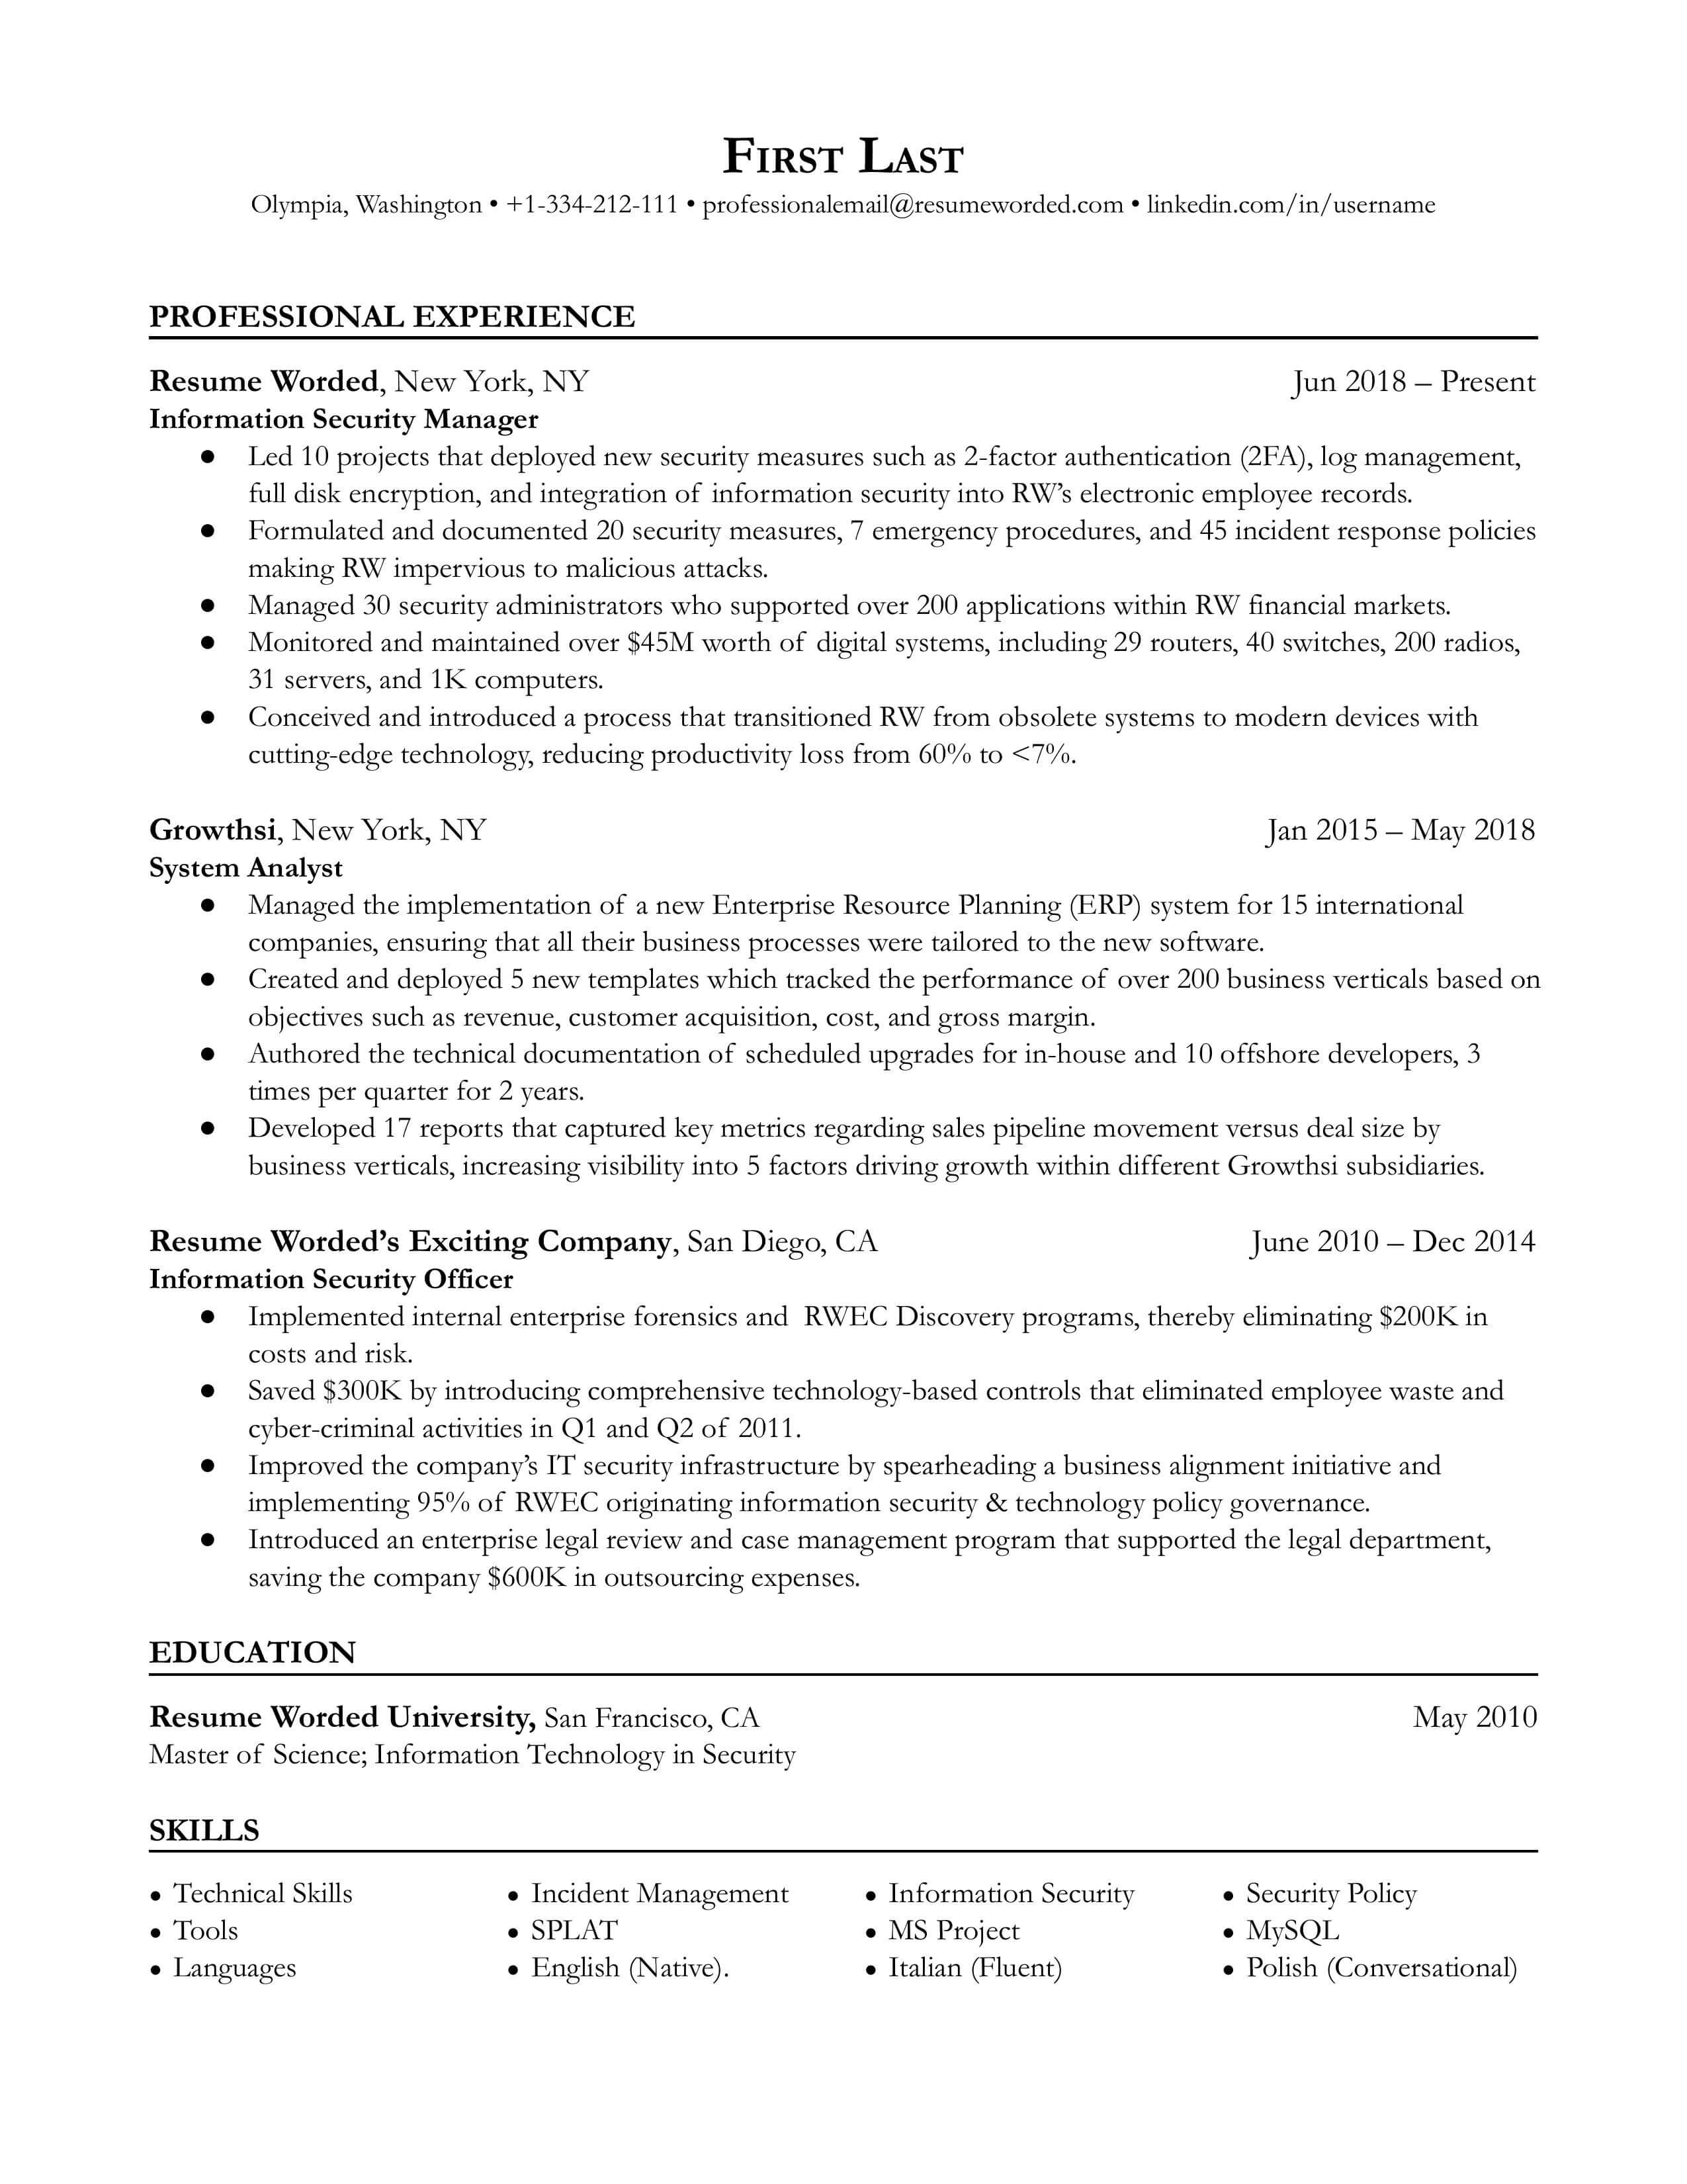 Here's a resume template to take inspiration from if you want to land a job as an information security manager.